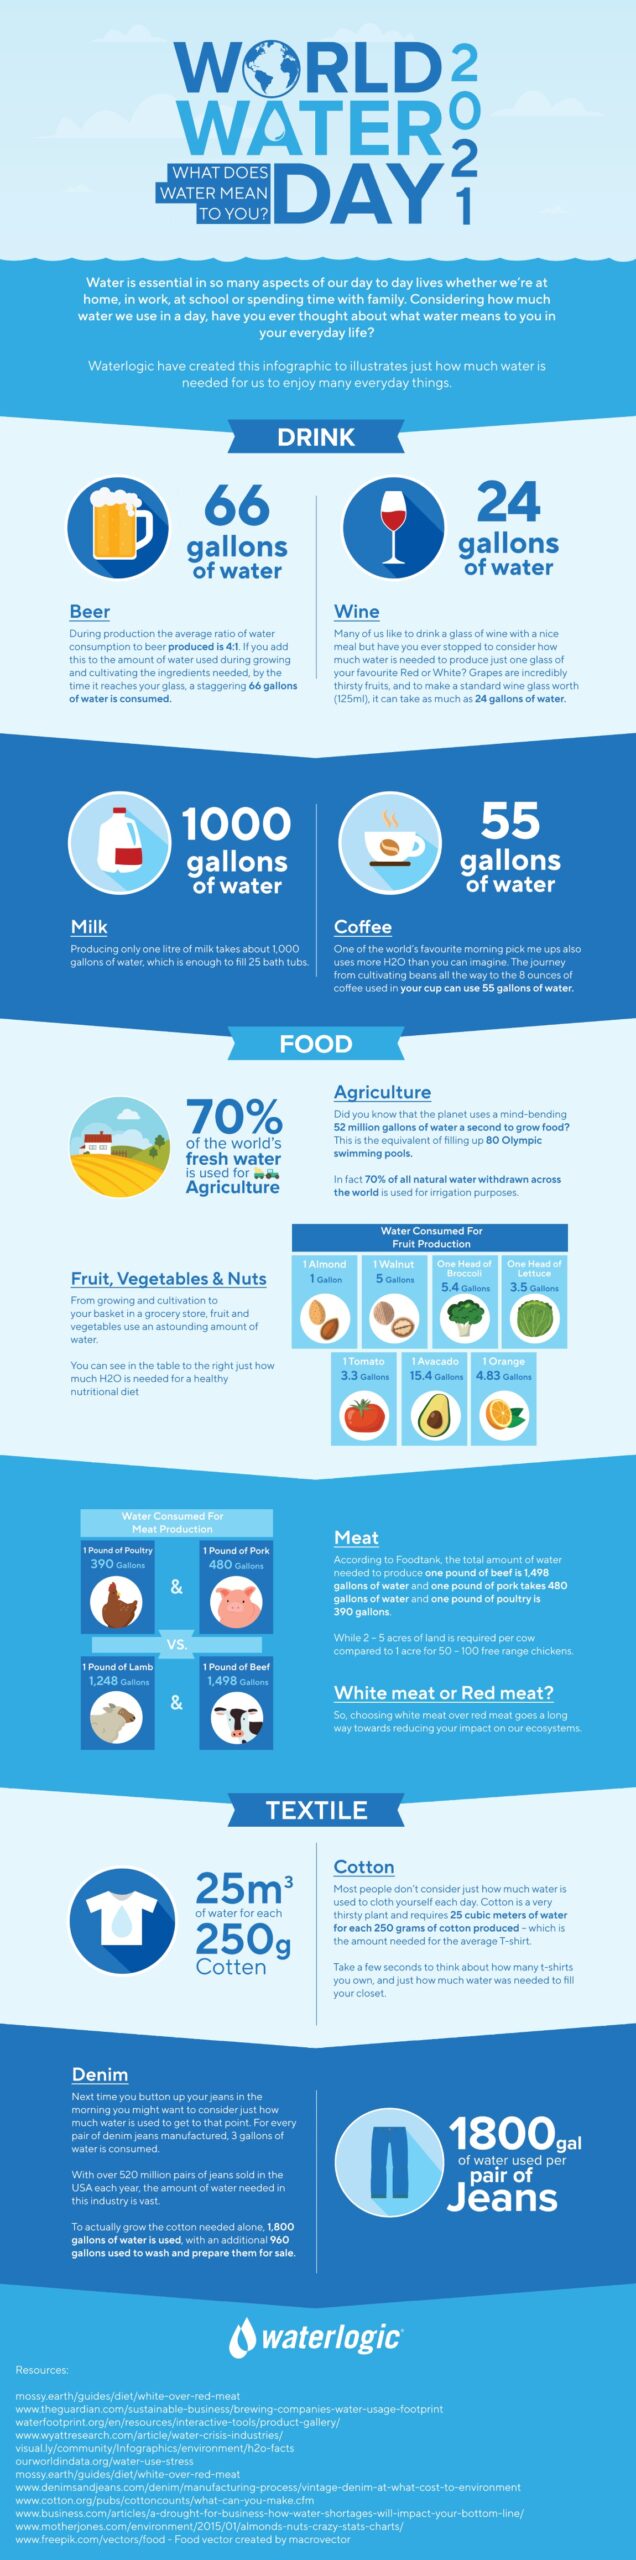 World Water Day Infographic